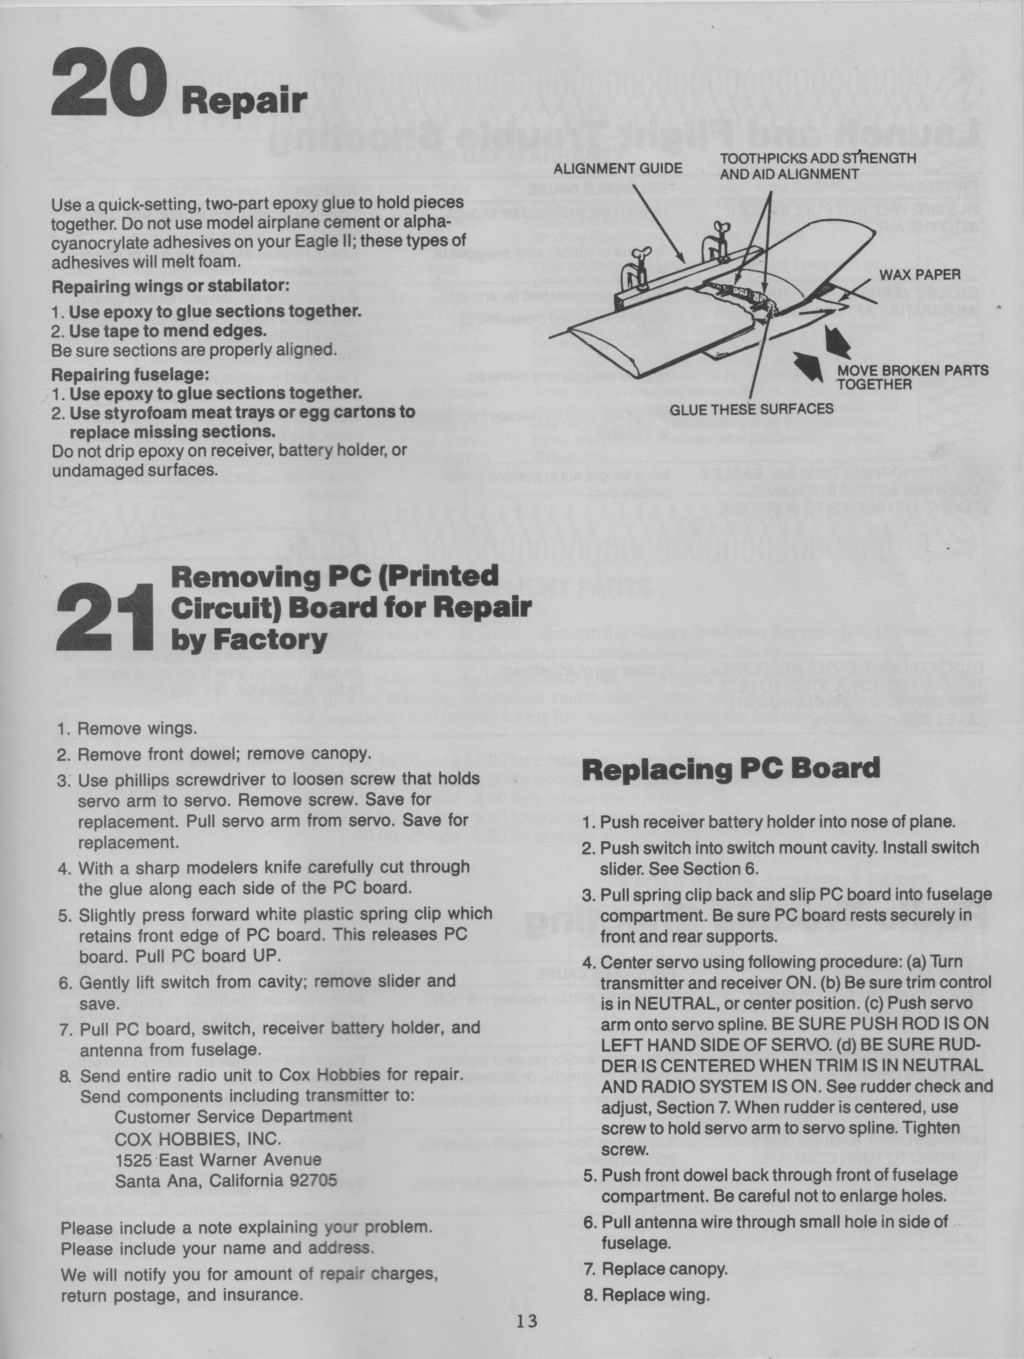 Eagle II pictures and manual scans. Eagle_23